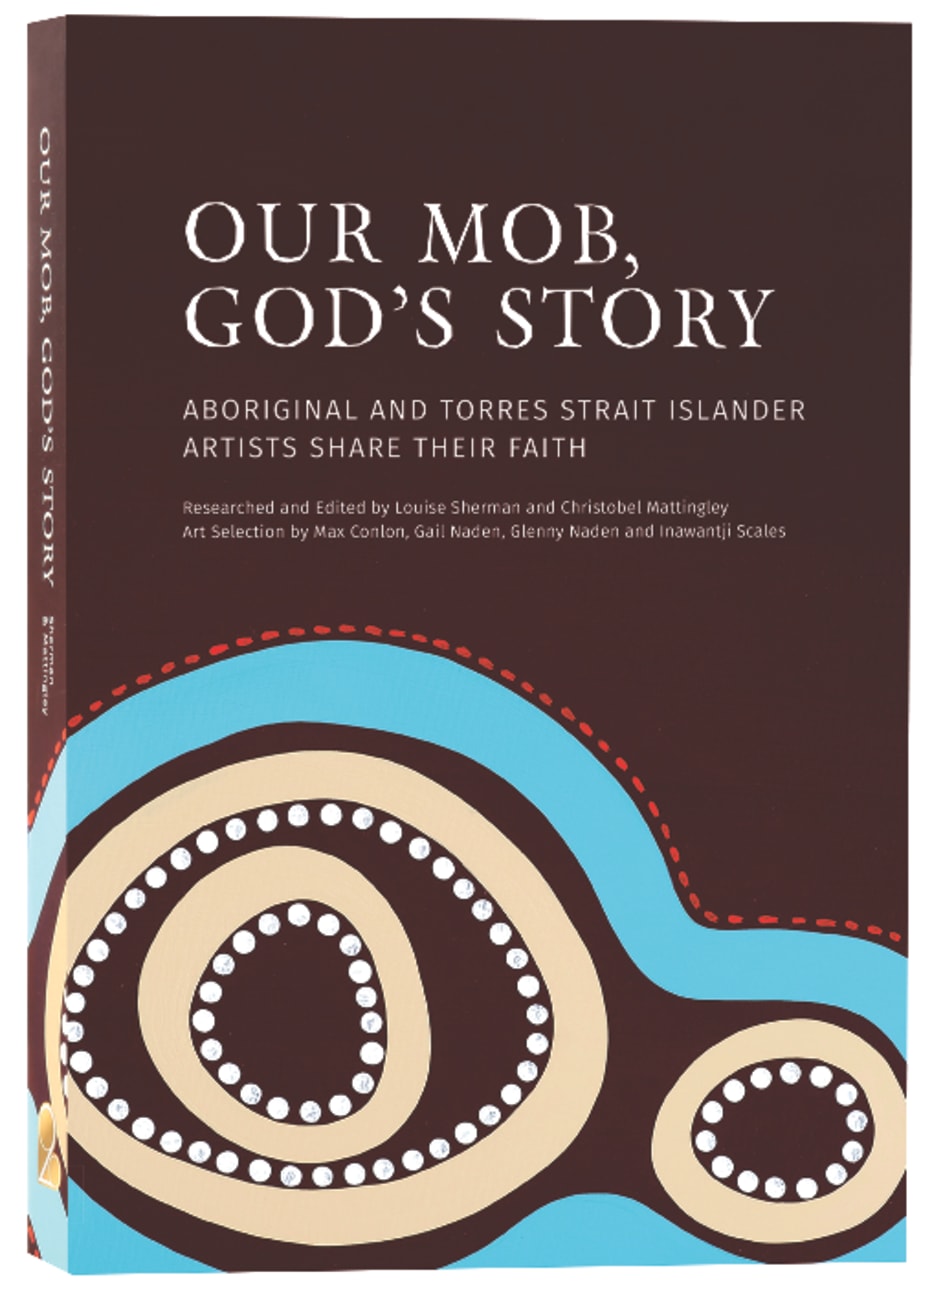 OUR MOB GOD'S STORY: ABORIGINAL AND TORRES STRAIT ISLANDER CHRISTIANITY